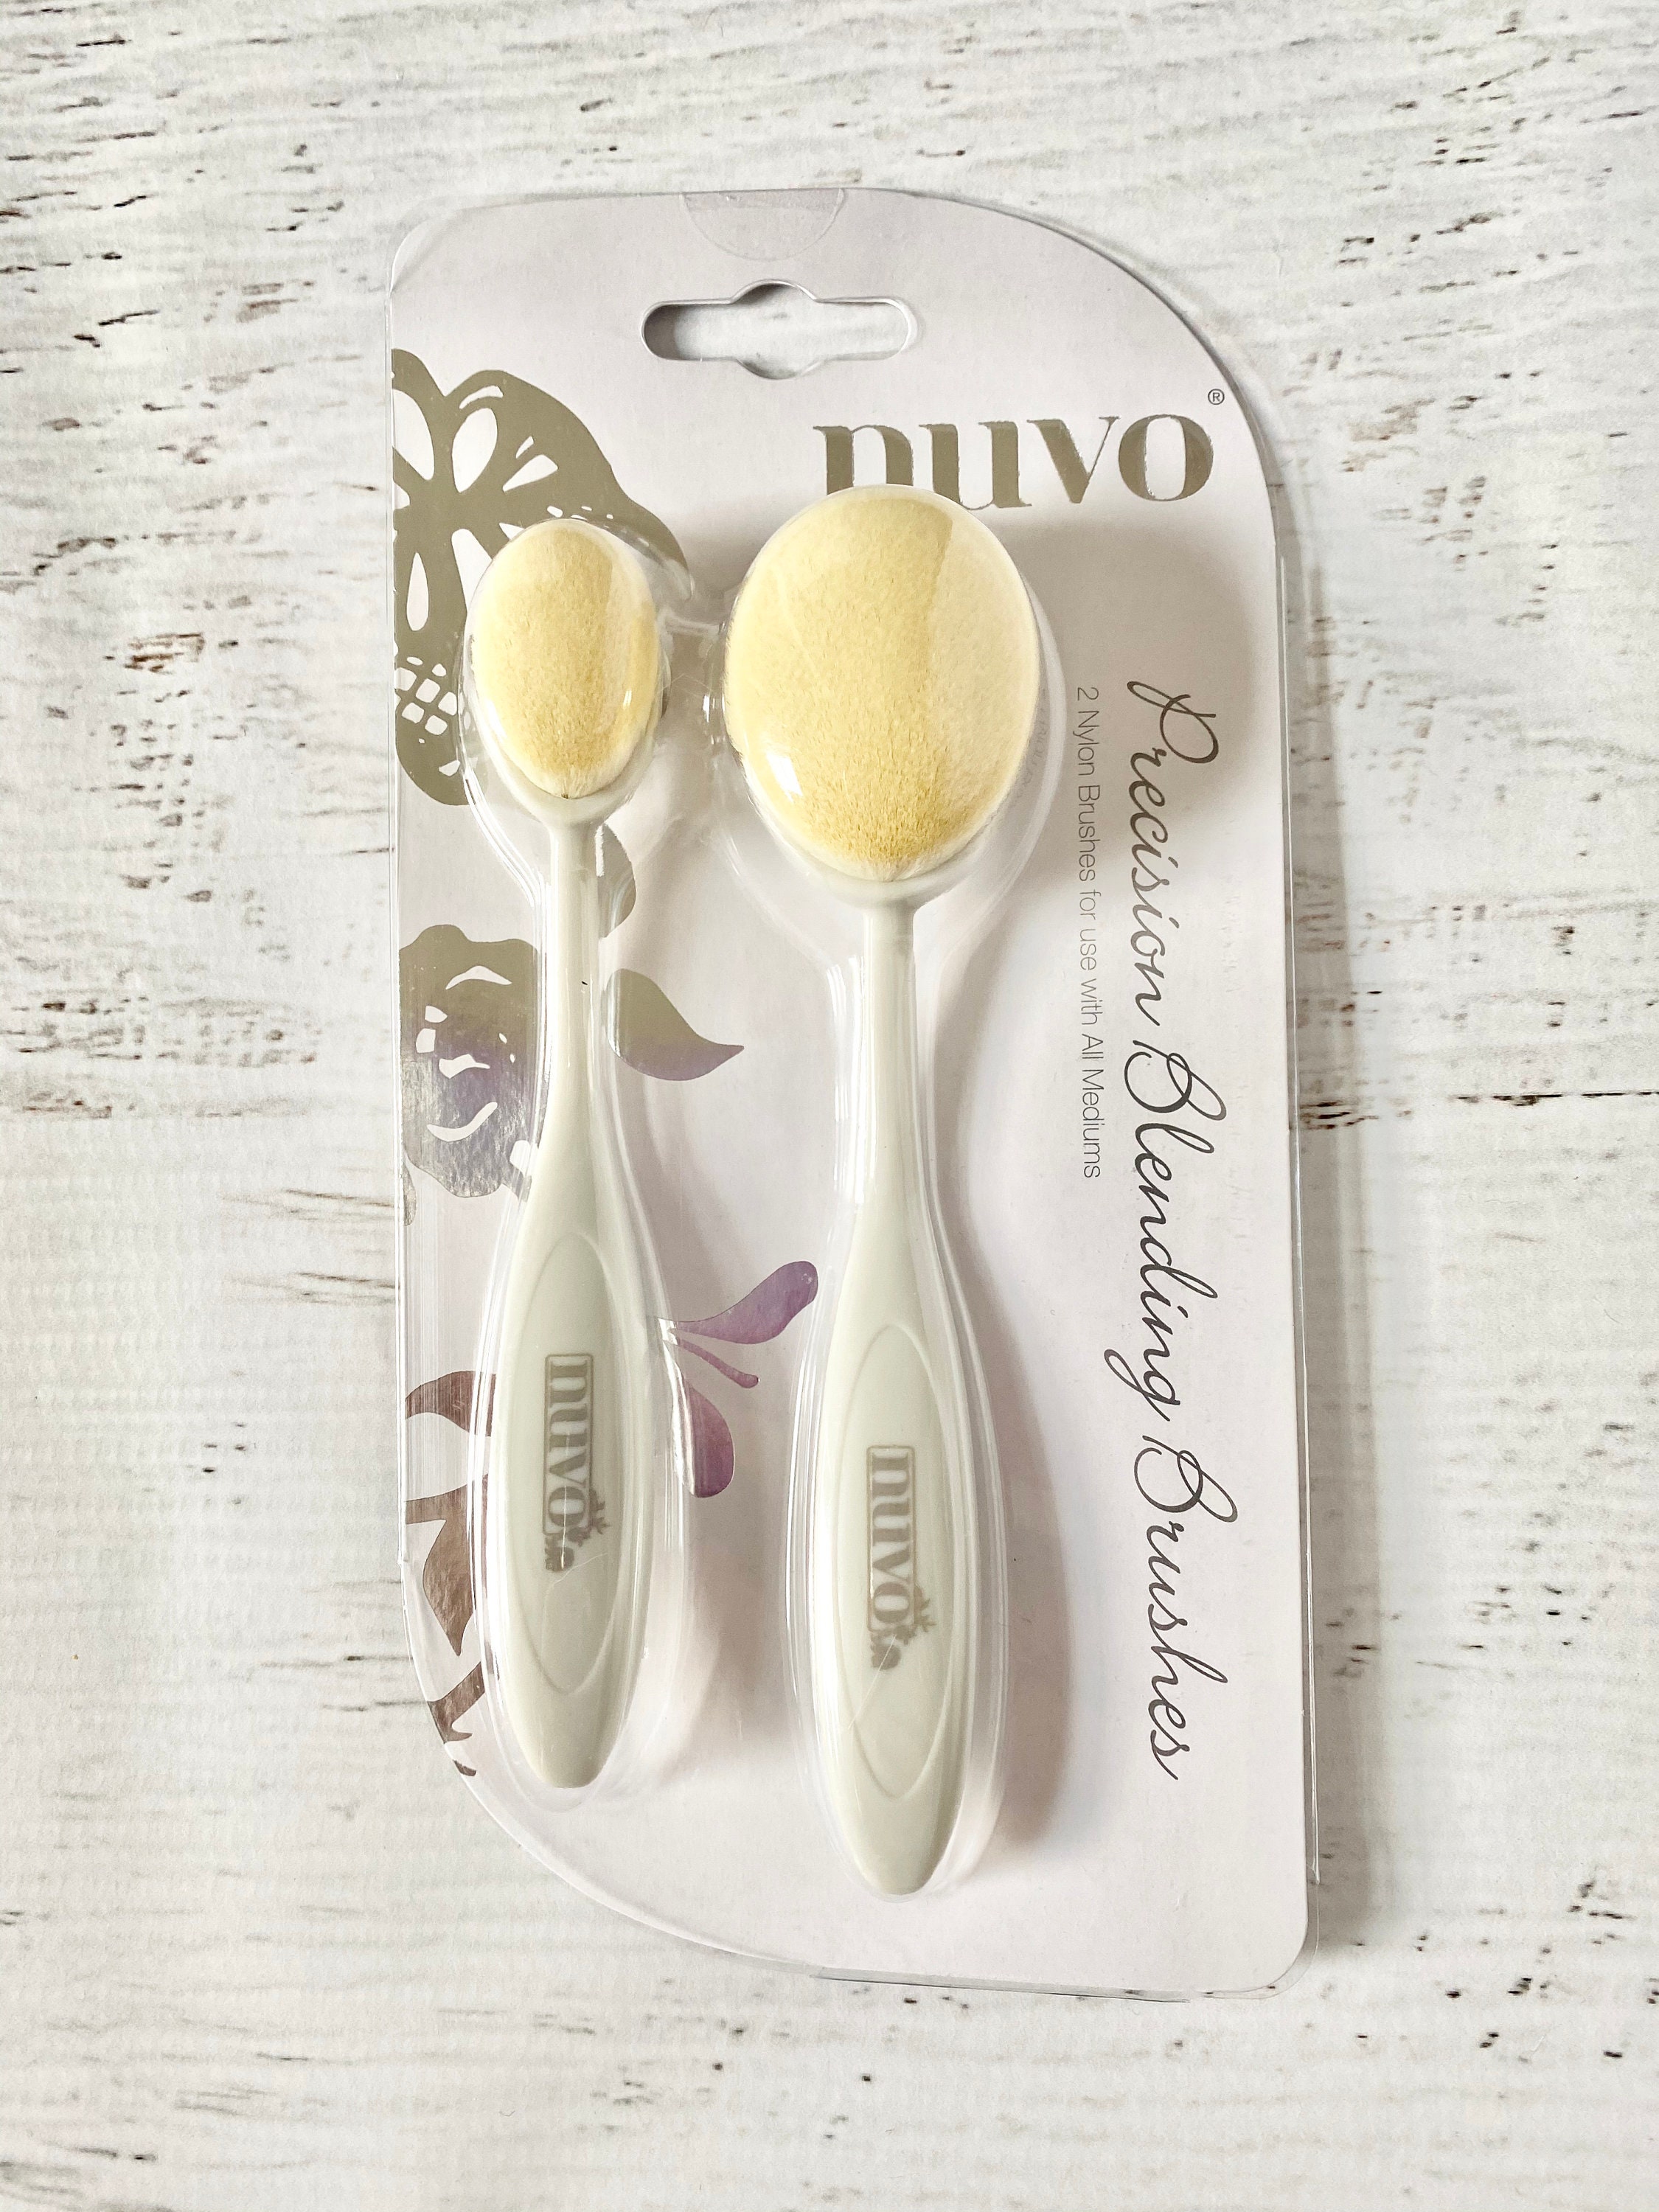 Nuvo 2 Precision Blending Brush Set, By Tonic Studios, Brushes For Use with All Mediums, Card Making, Stenciling, Mixed Media, Art Journaling